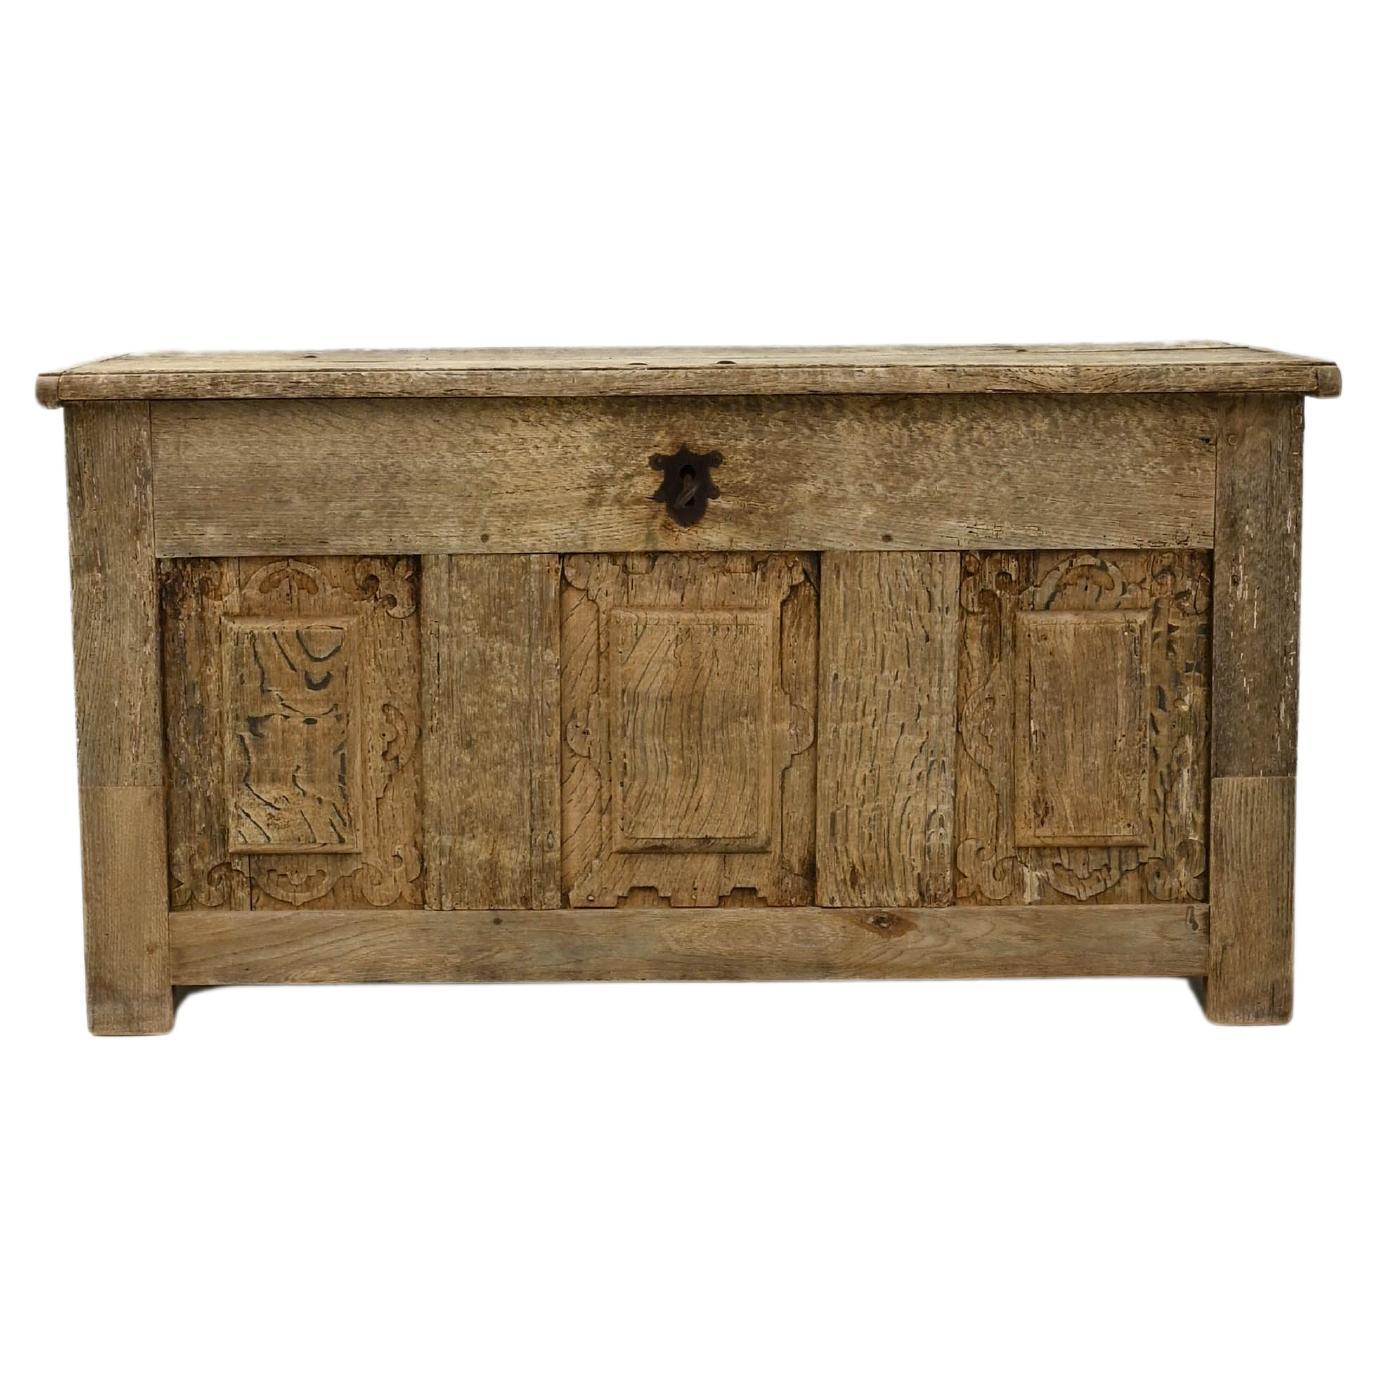 19th Century French Bleached Oak Trunk For Sale